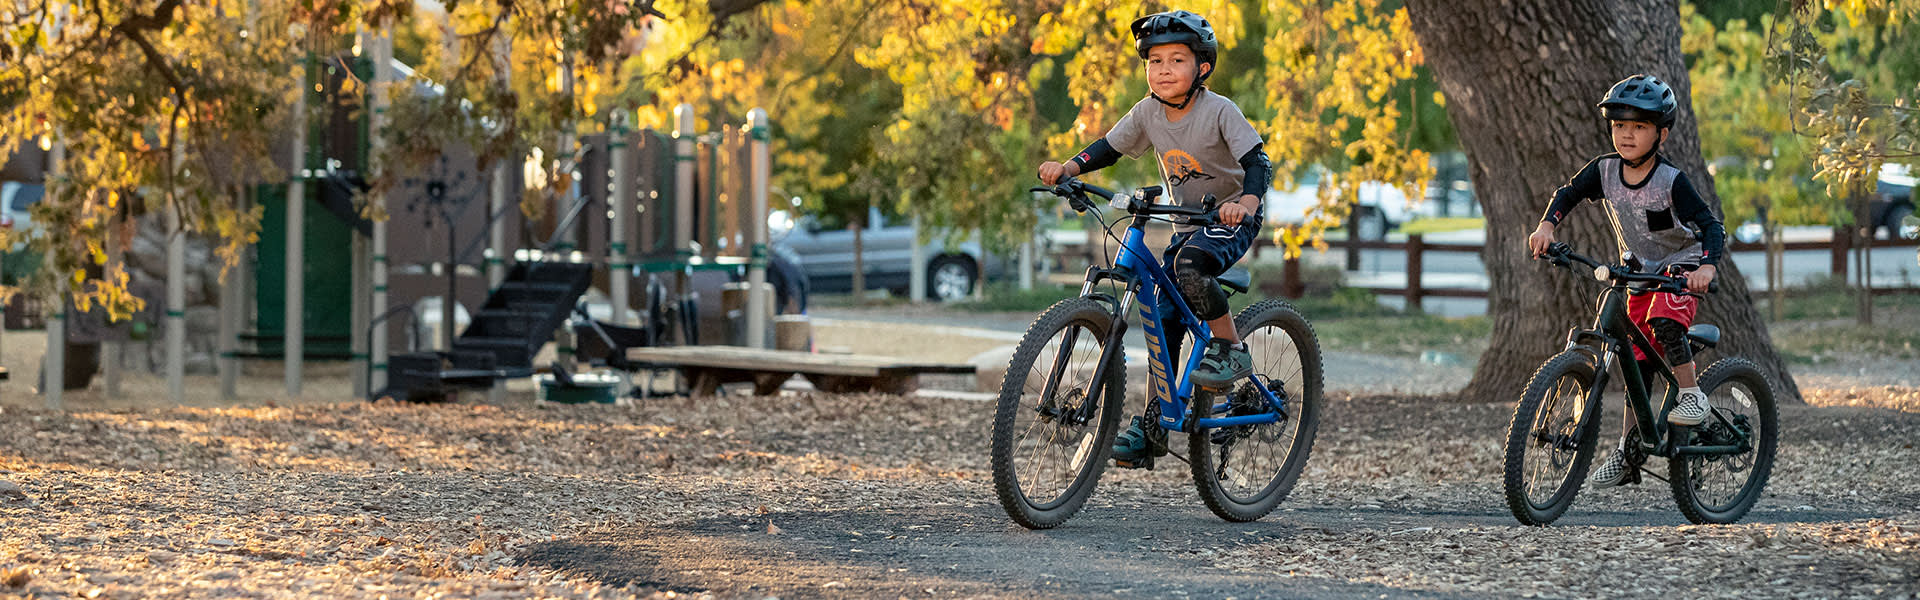 Giant mountain bikes for kids available for sale online at giveaway prices